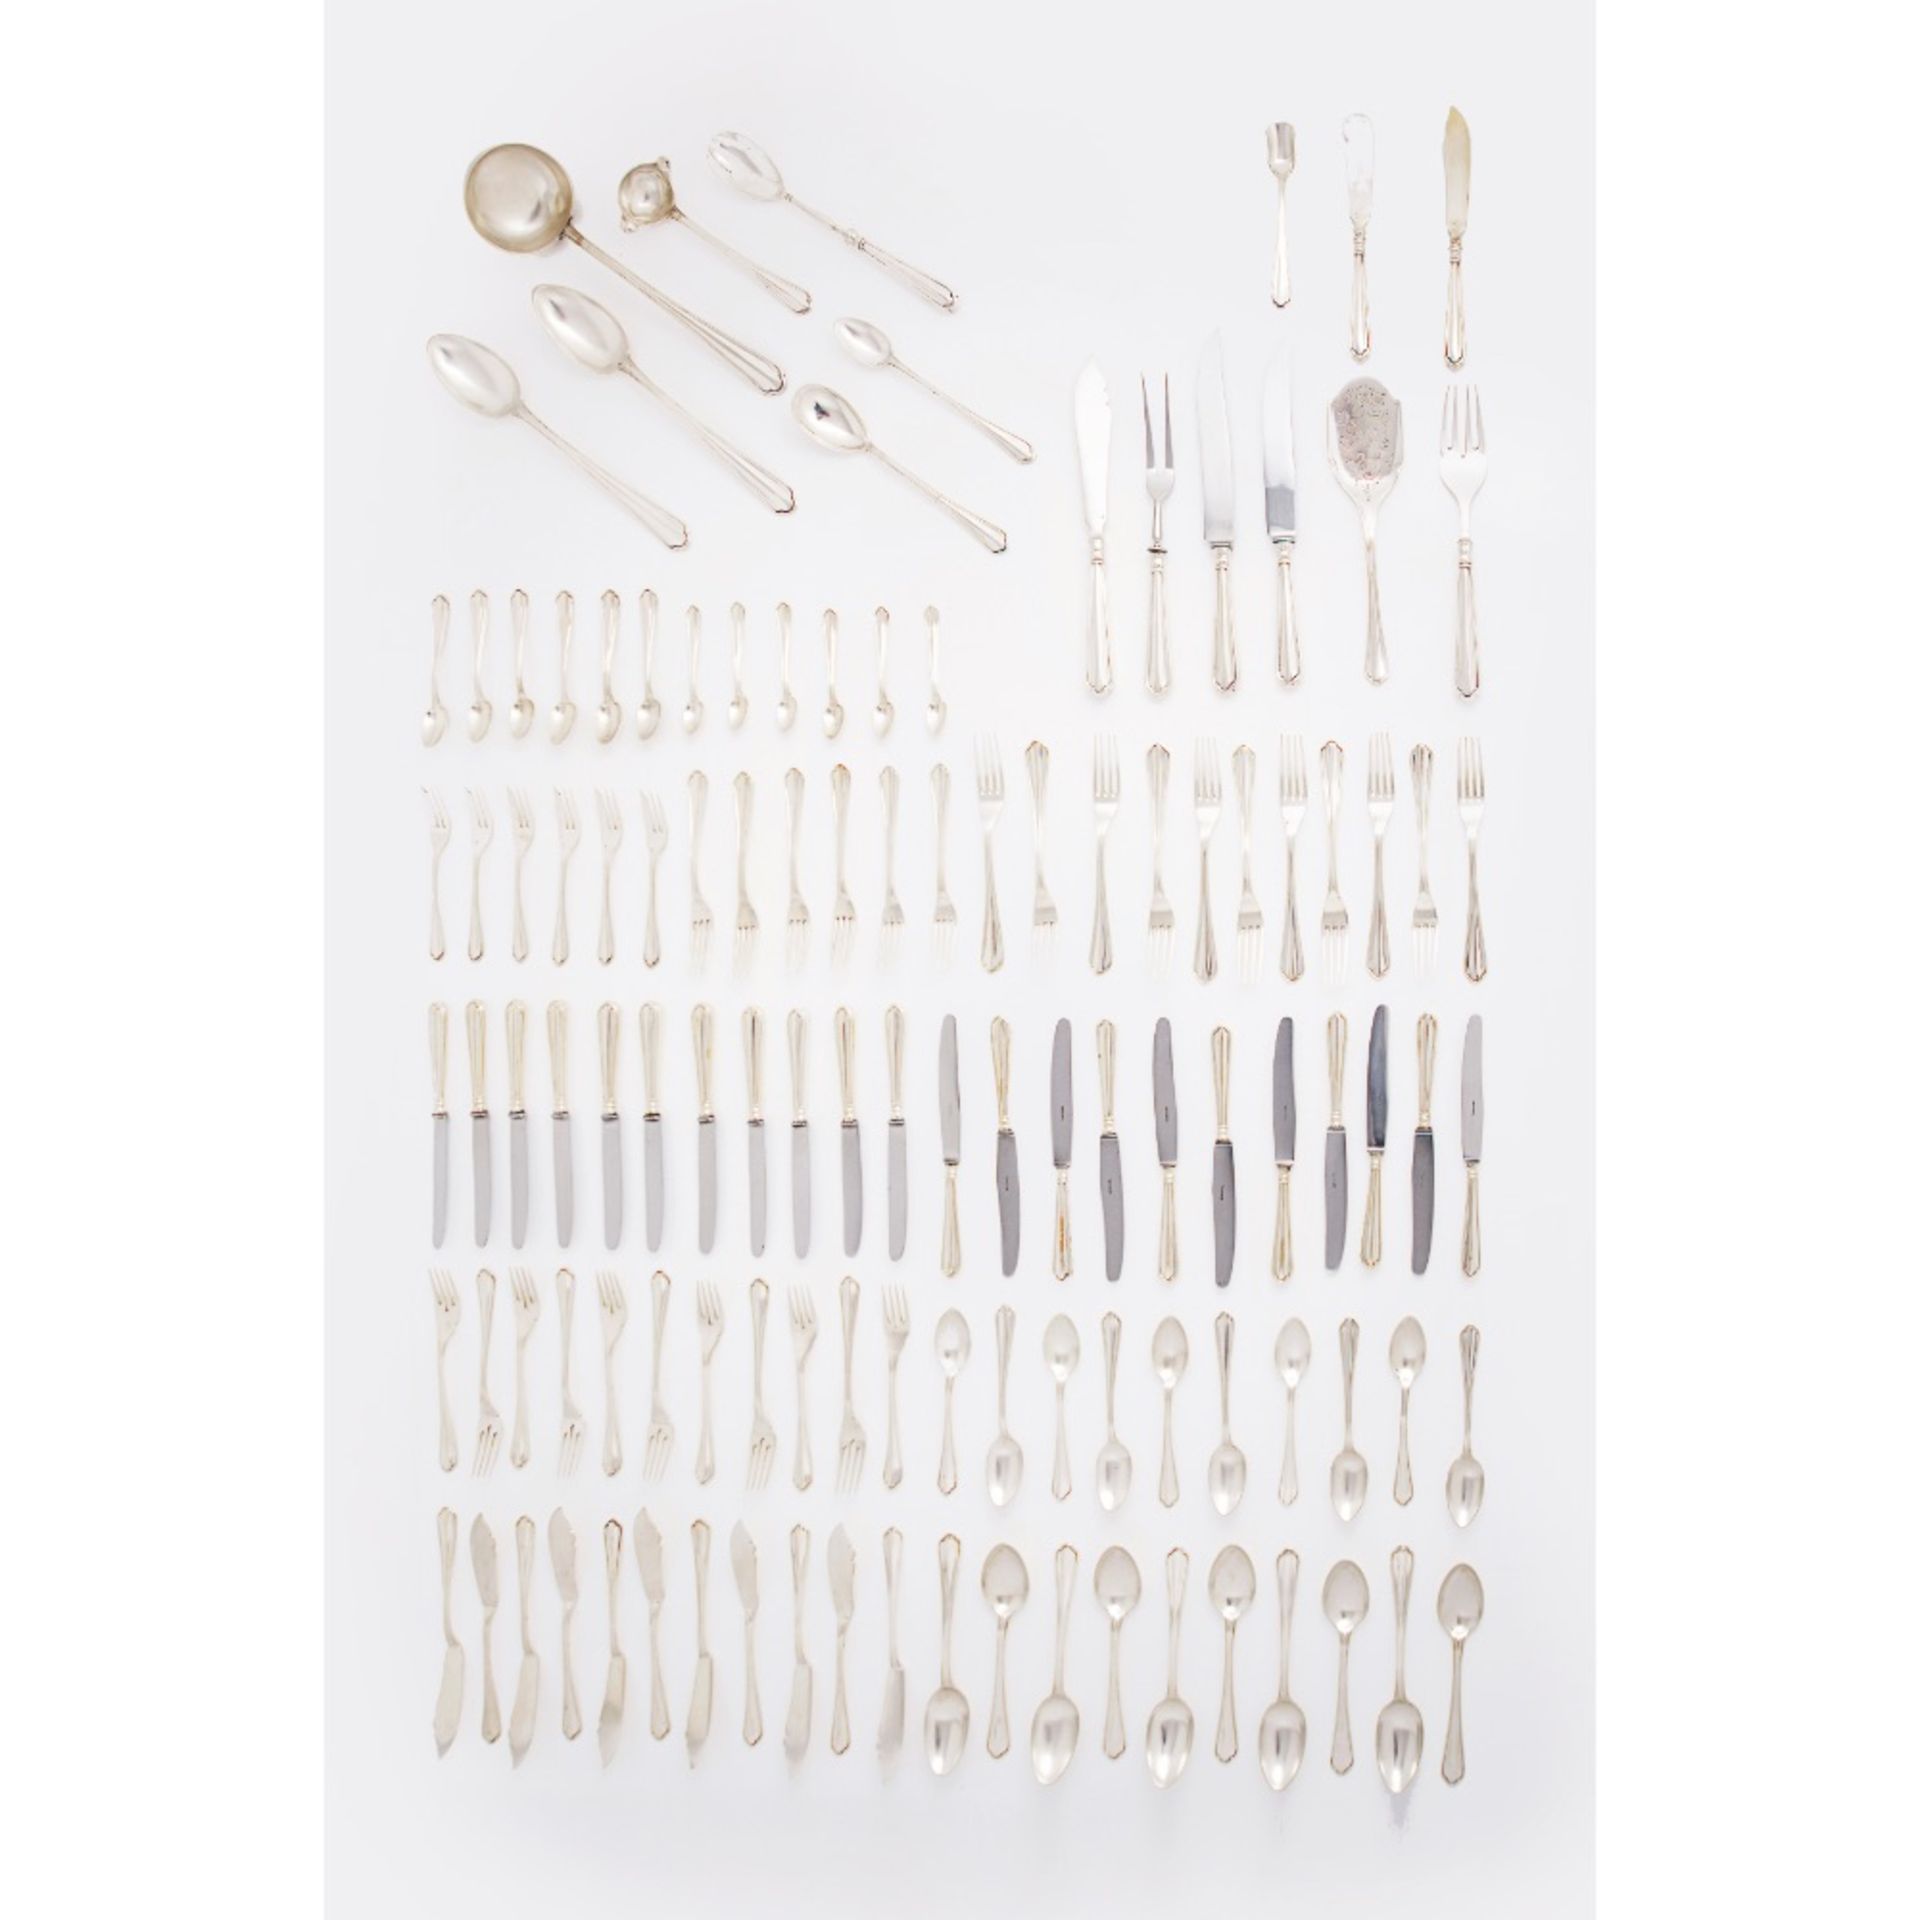 A part cutlery set for 24 covers